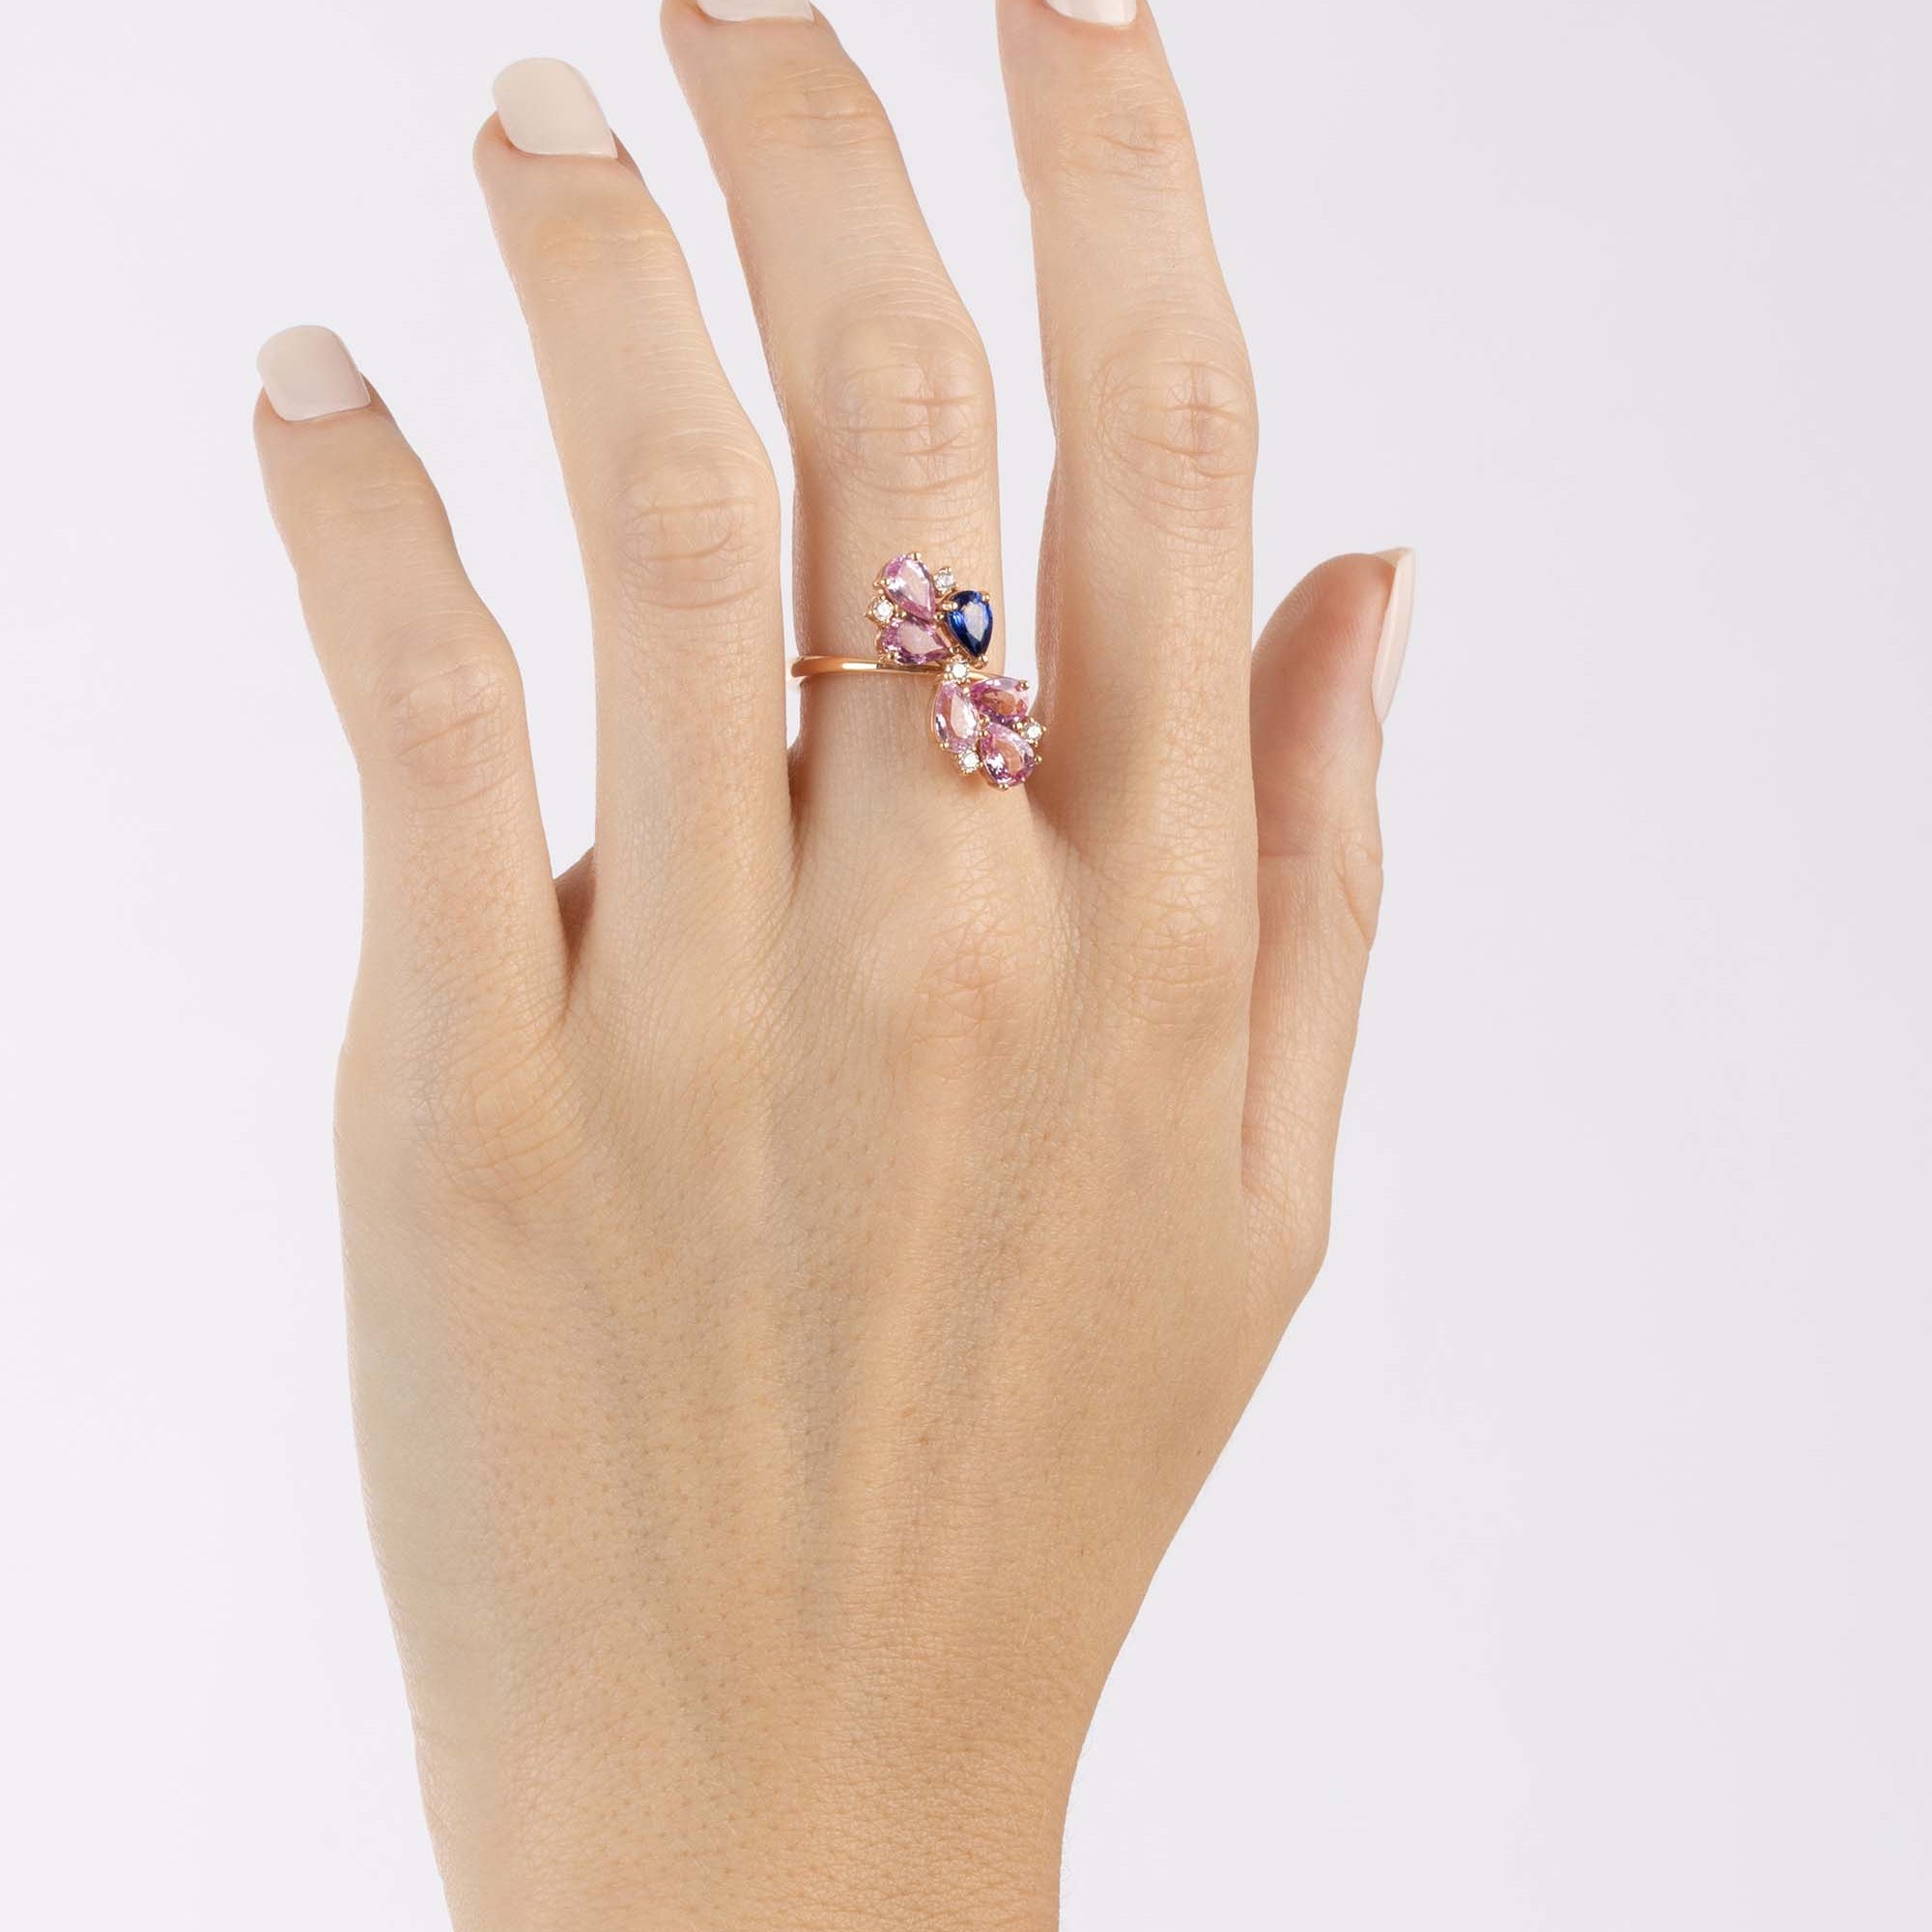 Rose Gold Ring with Pink Sapphires and a Blue Sapphire, and small round Diamonds - Model shot